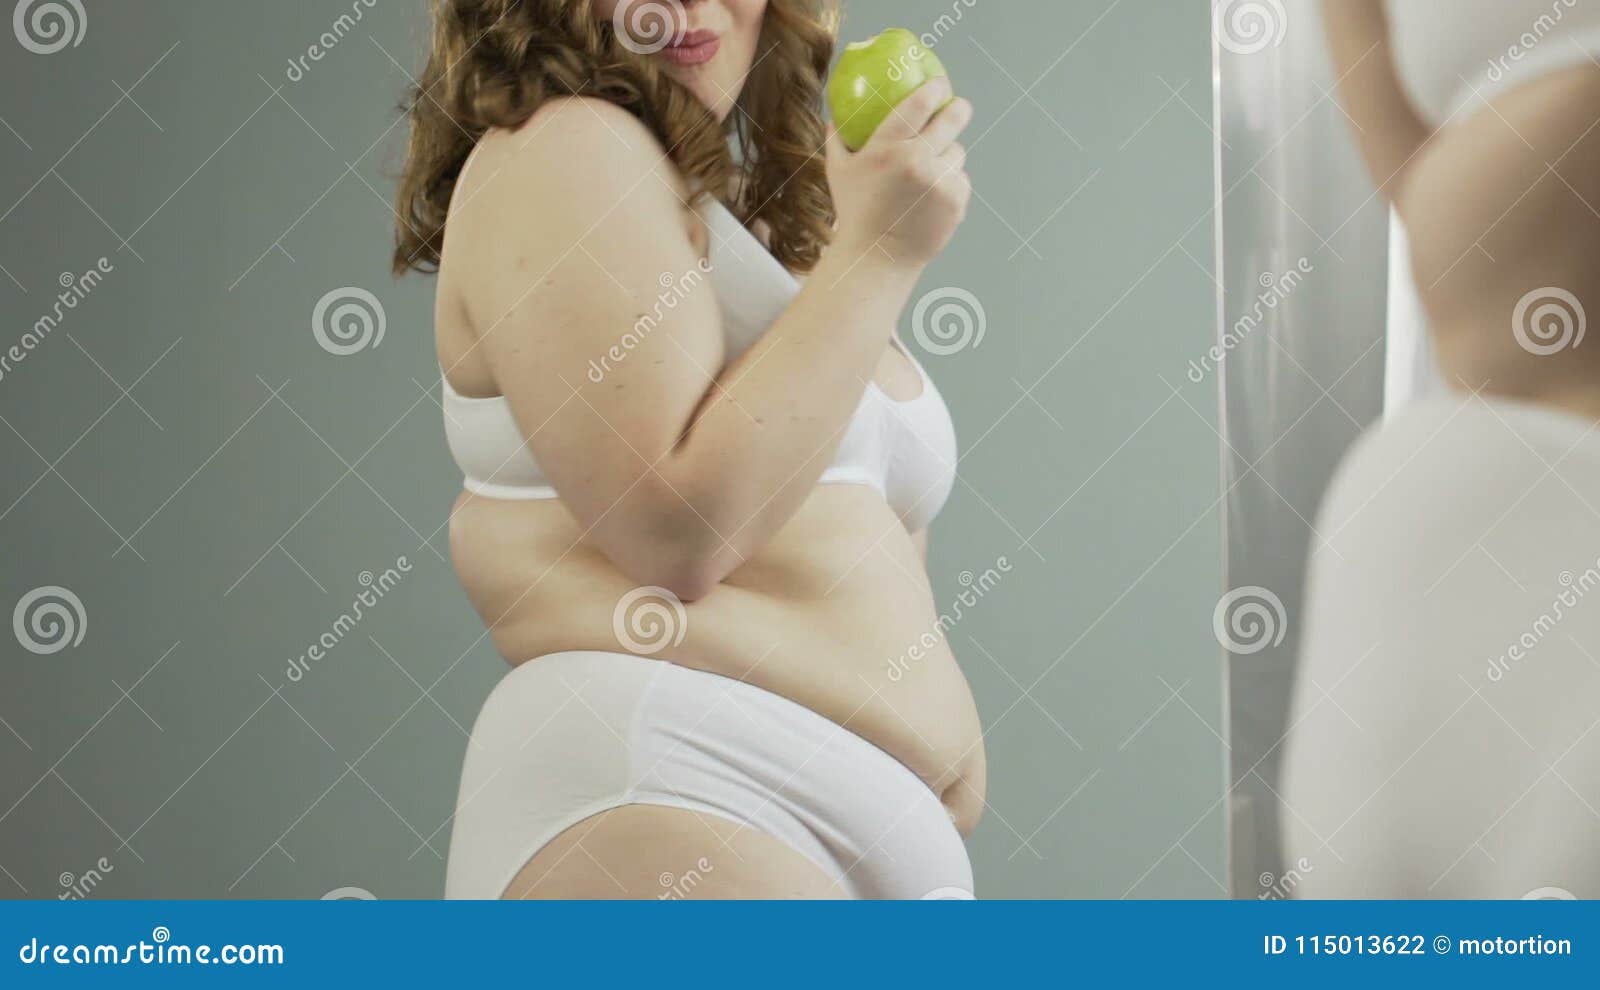 Overweight Woman in Underwear Admiring Her Body in Mirror and